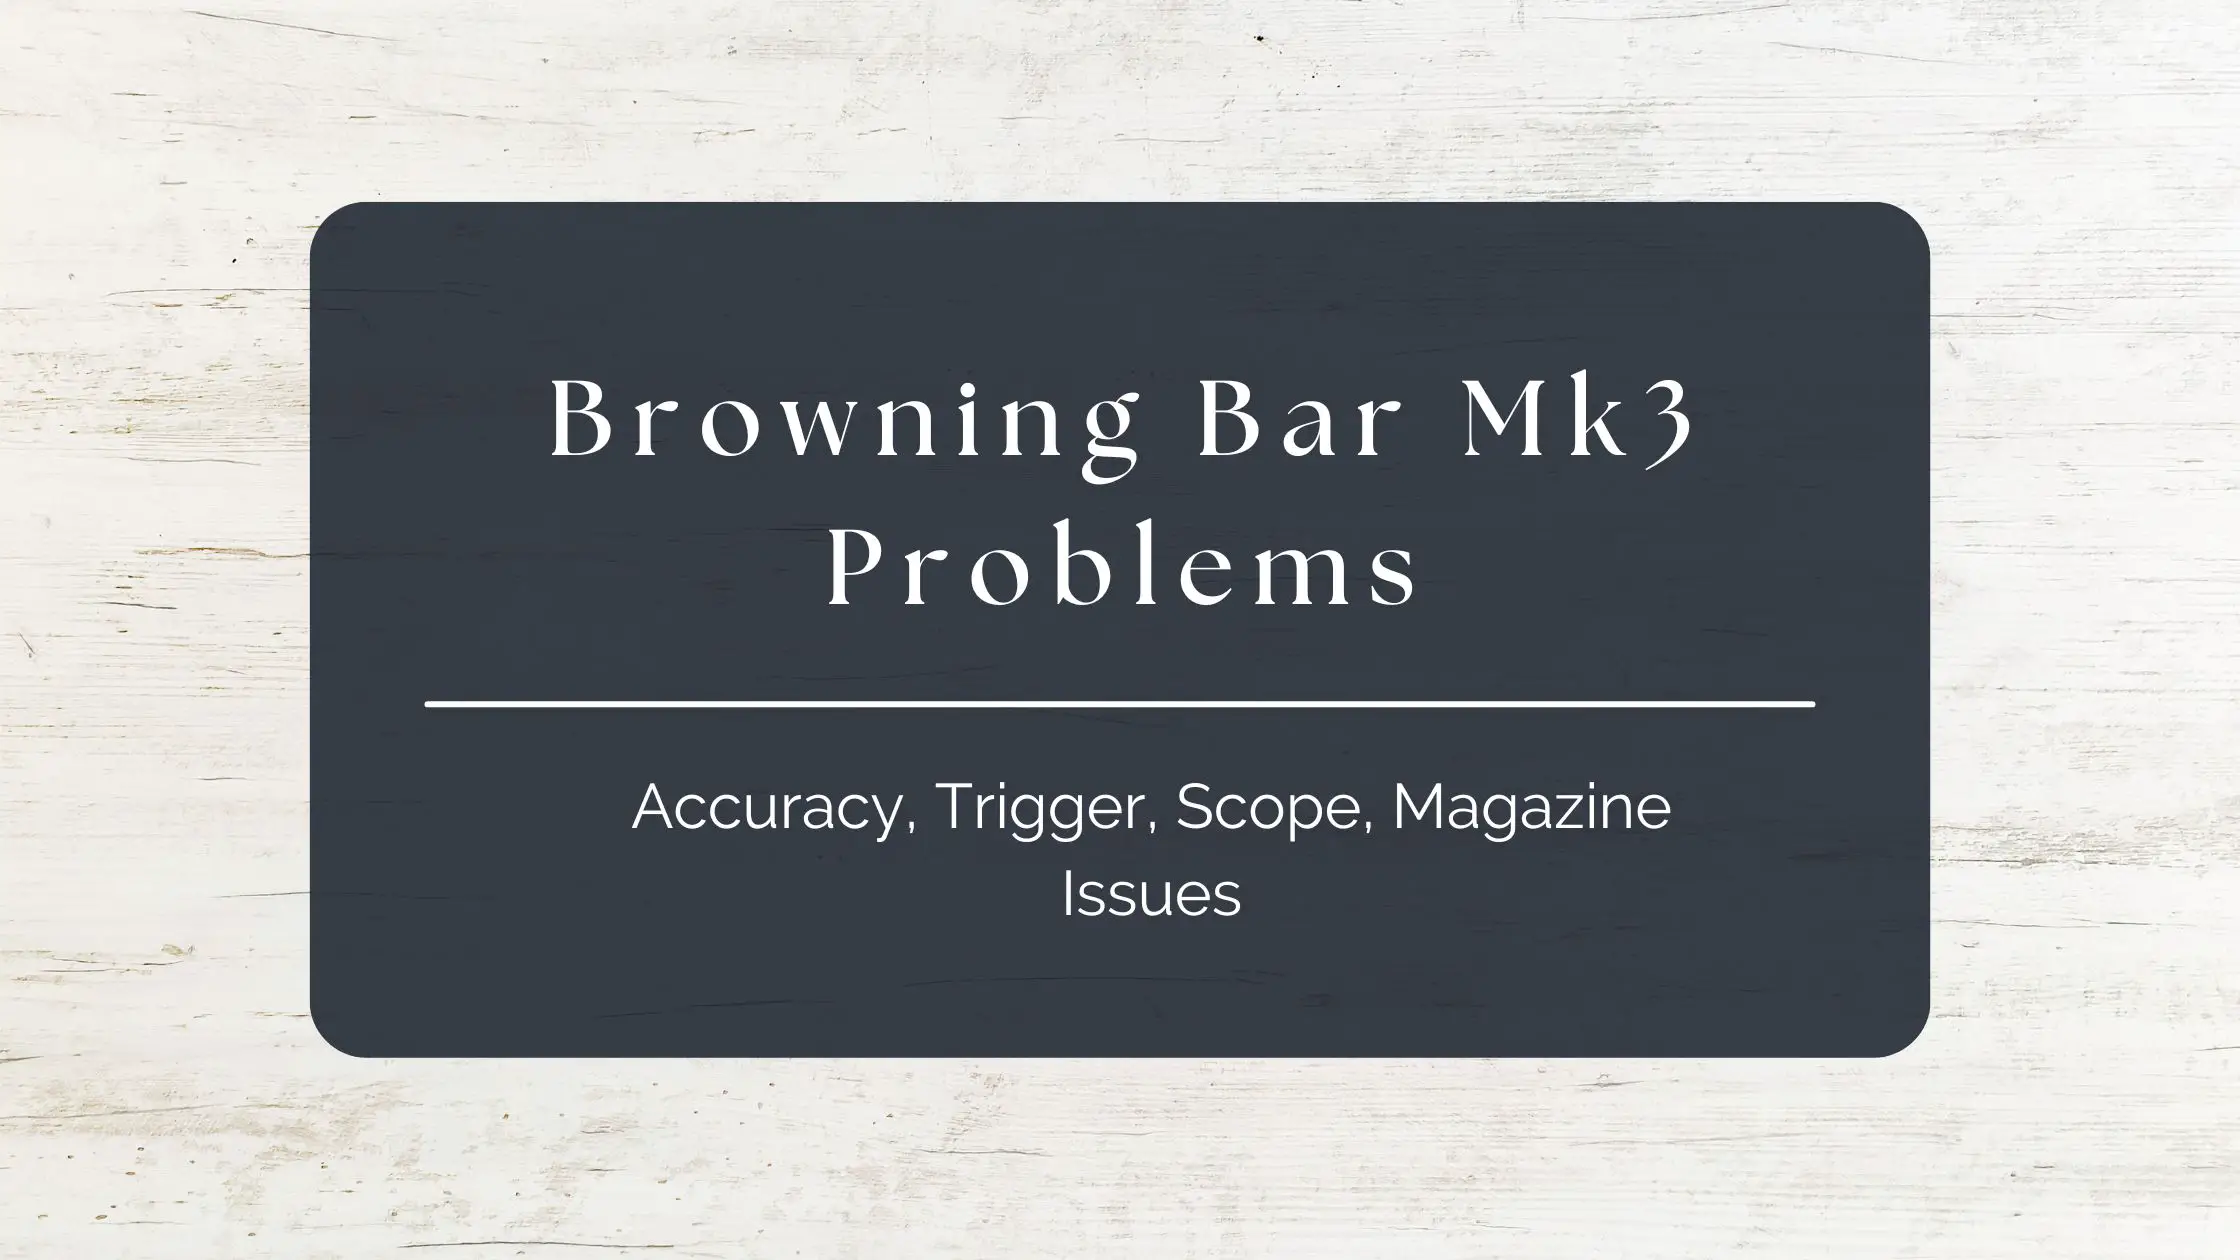 Browning Bar Mk3 Problems Accuracy, Trigger, Scope, Magazine Issues